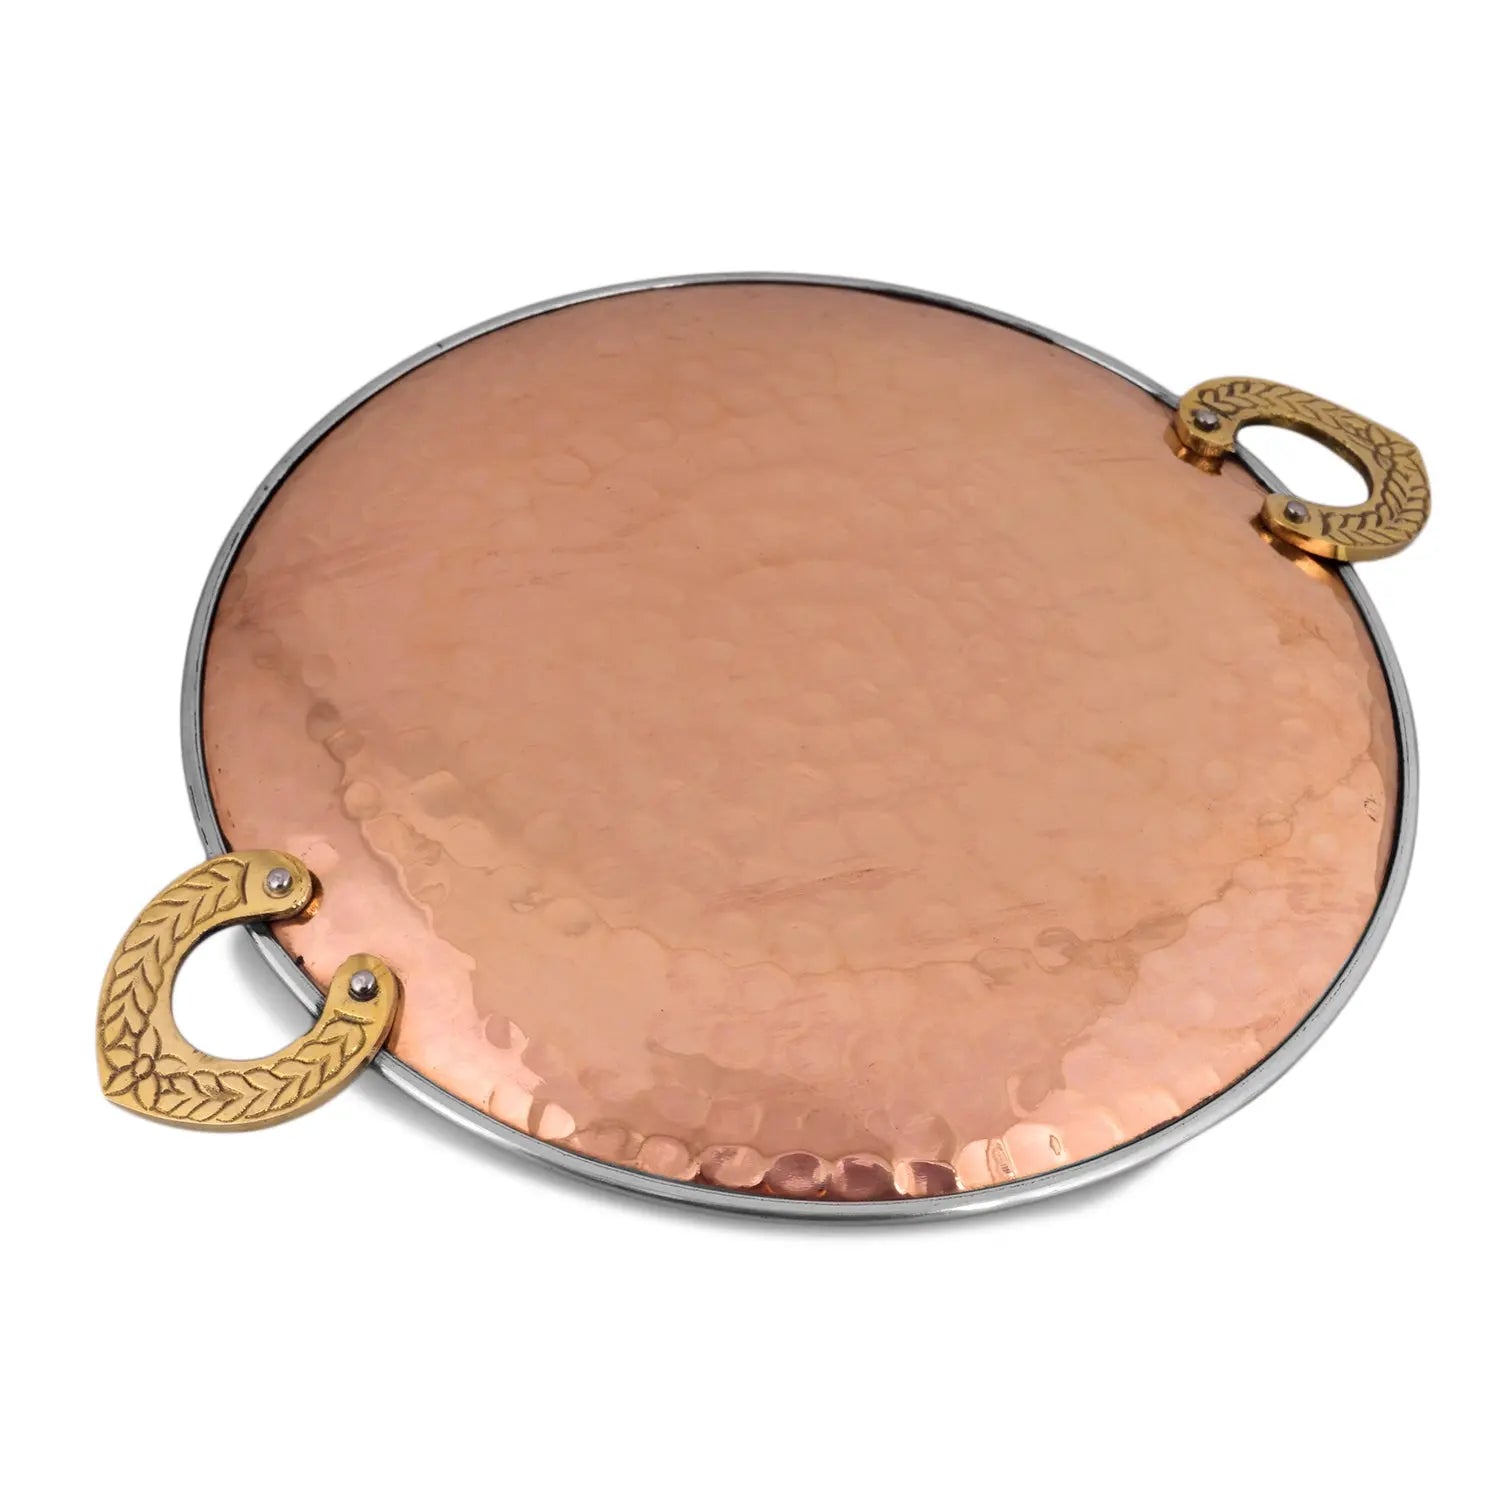 Copper Serving Platter Round With Brass Handles - CROCKERY WALA AND COMPANY 